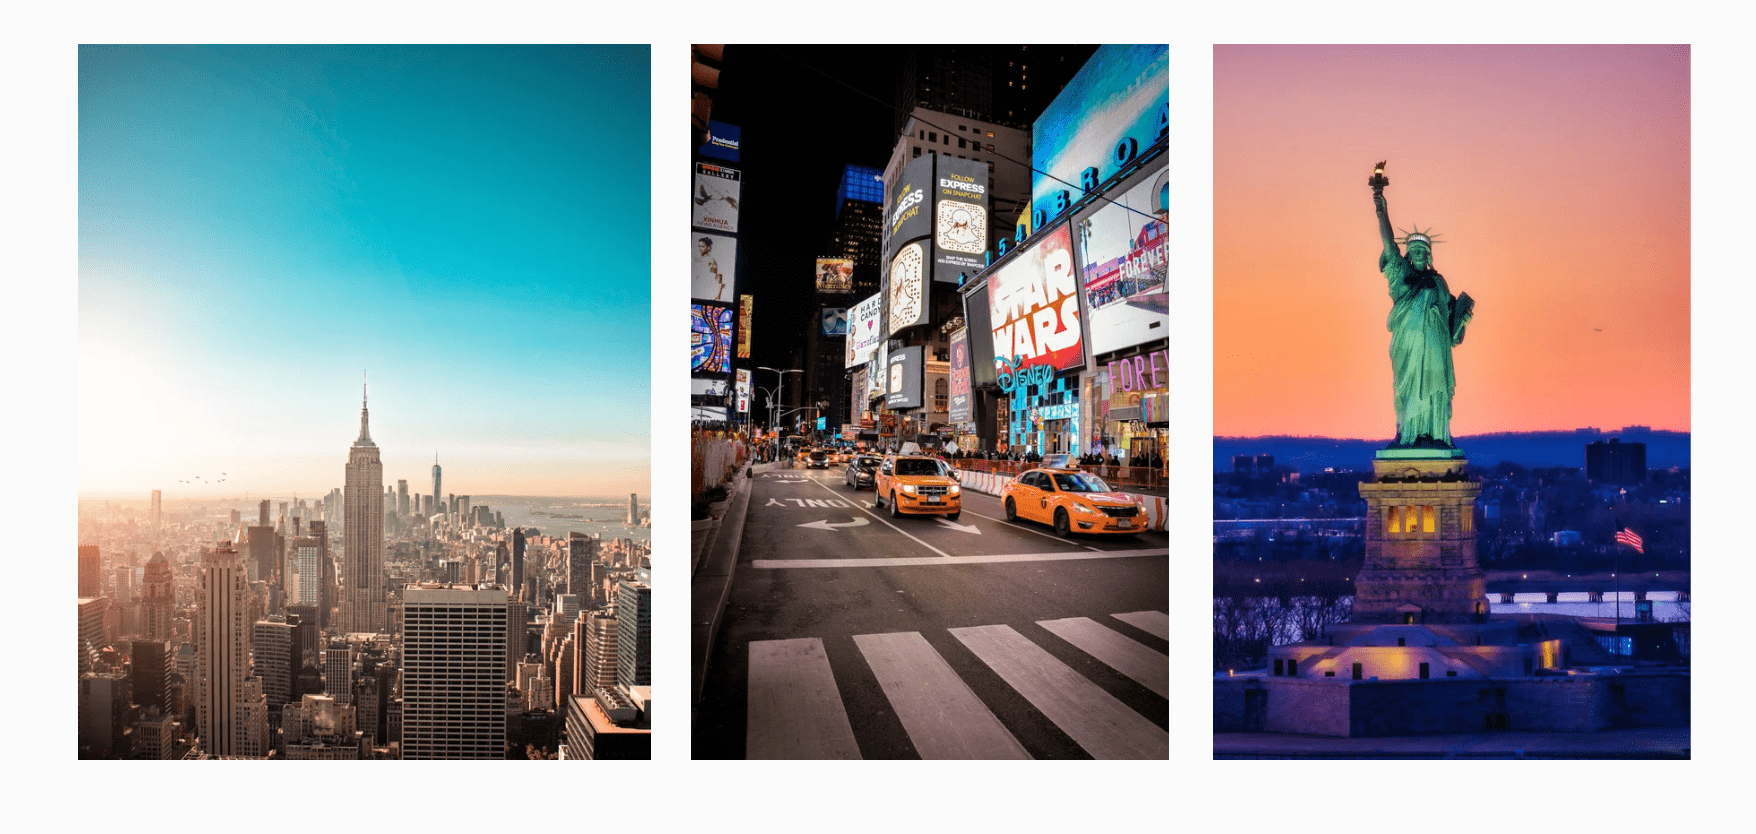 Short New York Quotes for Instagram